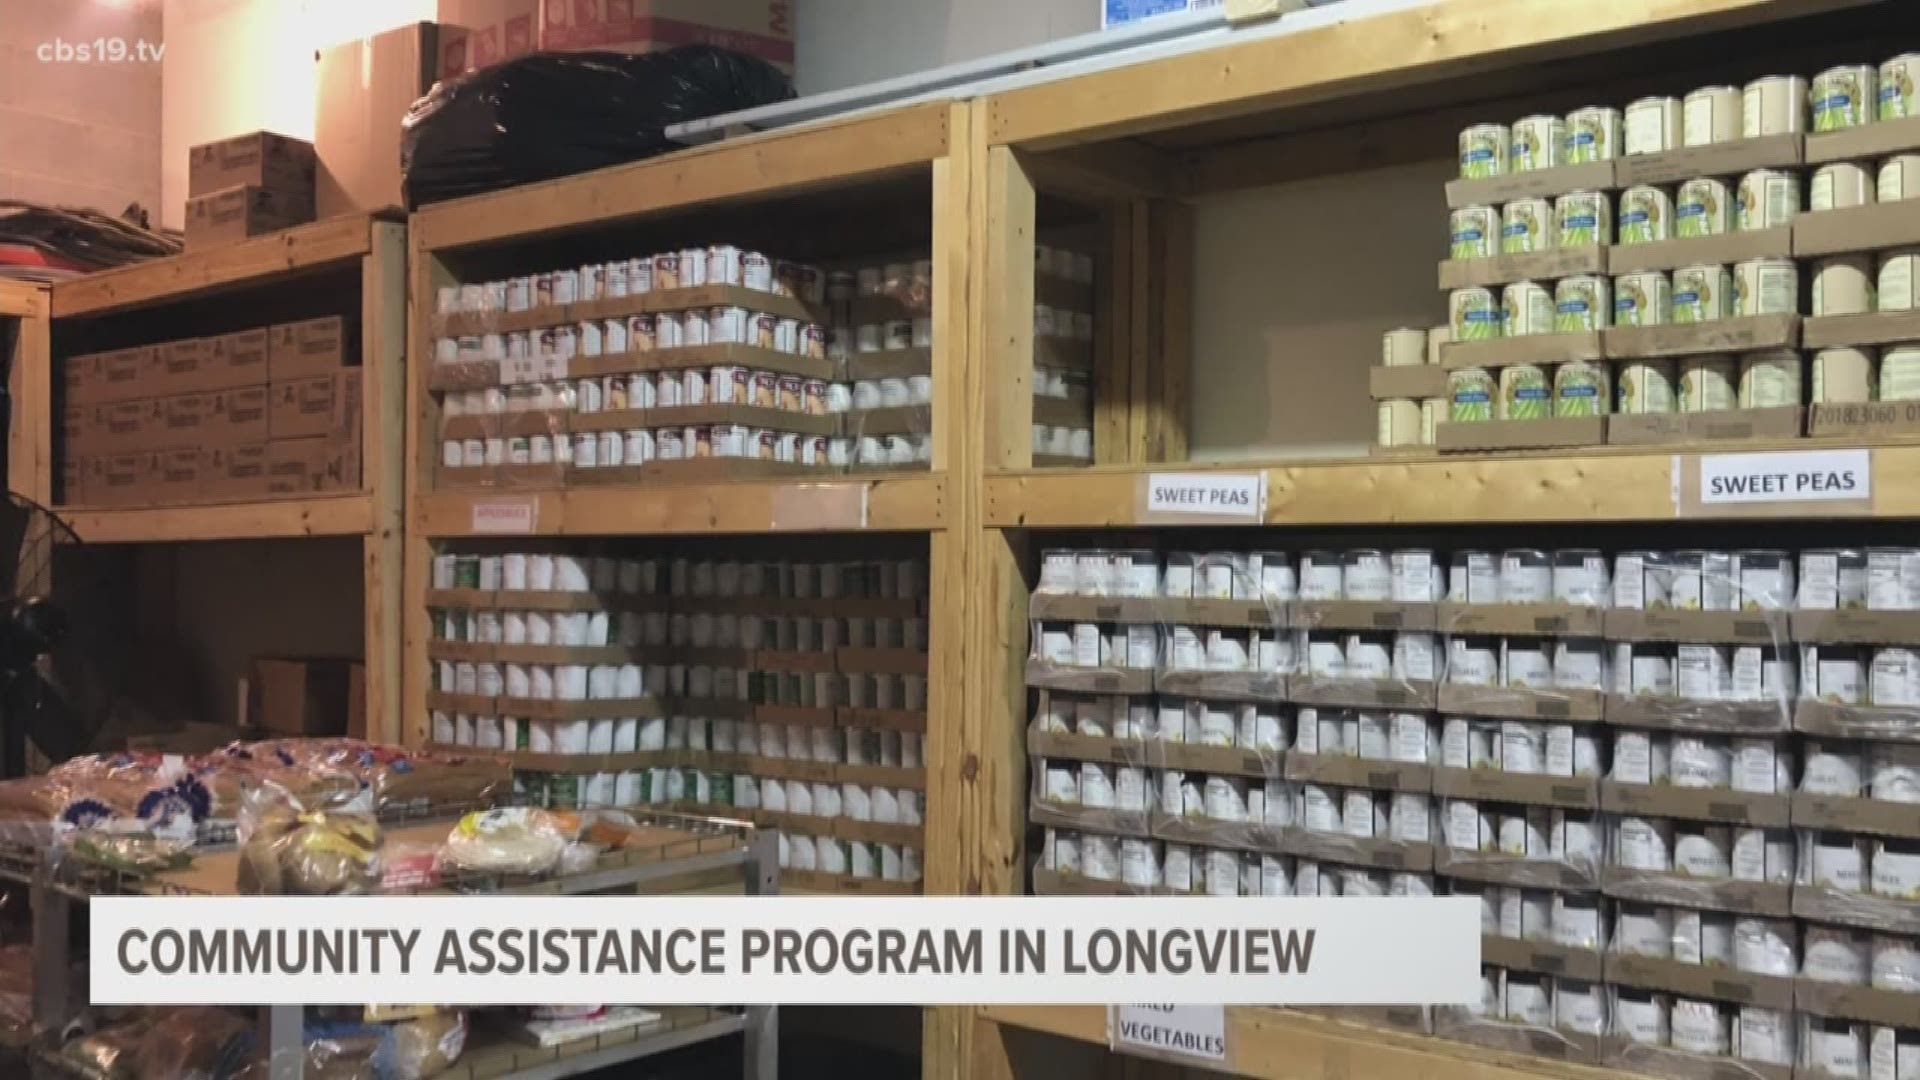 Longview Community Ministries has been assisting low-income families in Longview for 34 years.